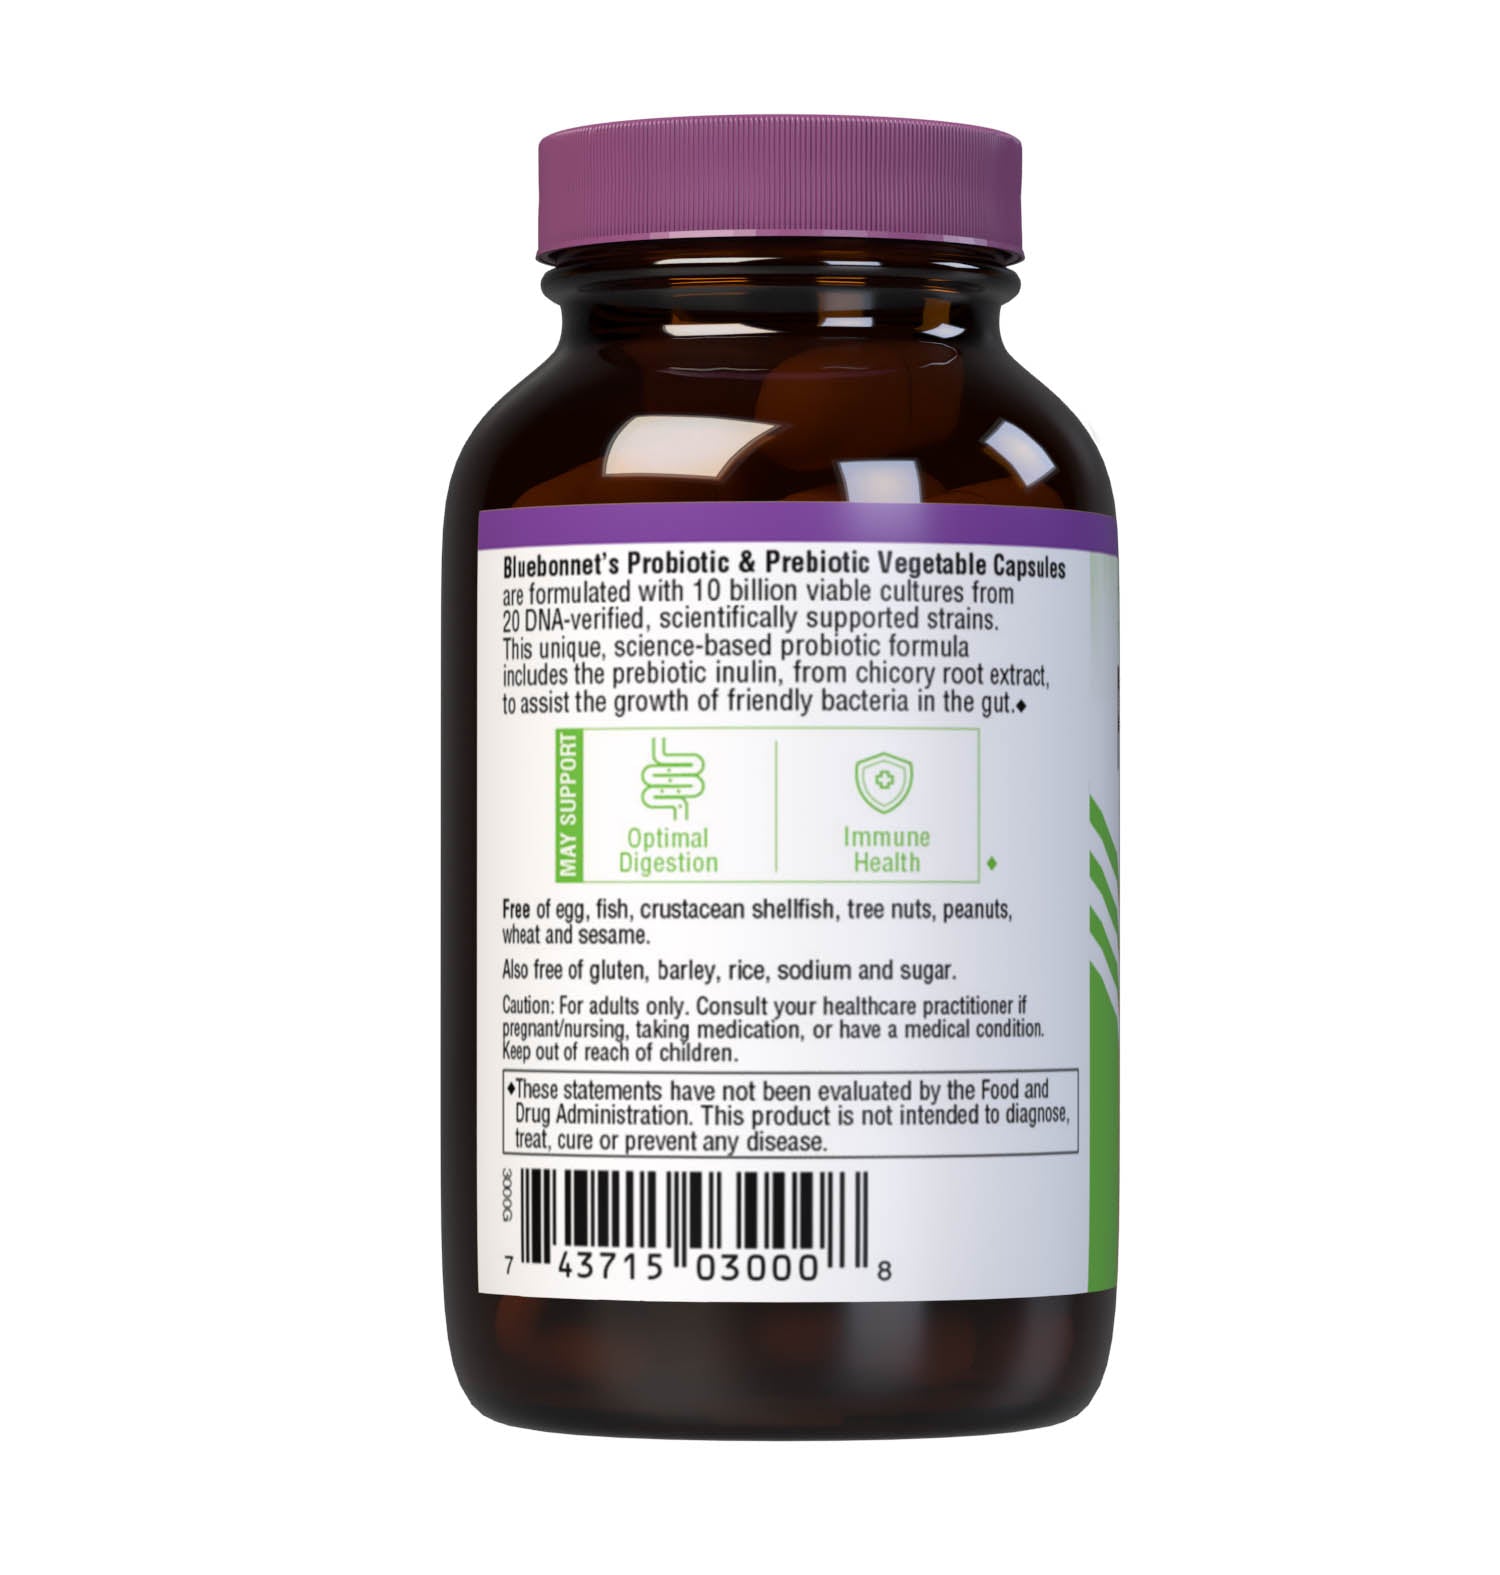 Bluebonnet’s Probiotic & Prebiotic 30 Vegetable Capsules are formulated with 10 billion viable cultures from 20 DNA-verified, scientifically supported strains. This unique, science-based probiotic formula includes the prebiotic inulin from chicory root extract, to assist the growth of friendly bacterium in the gut. Description panel. #size_30 count